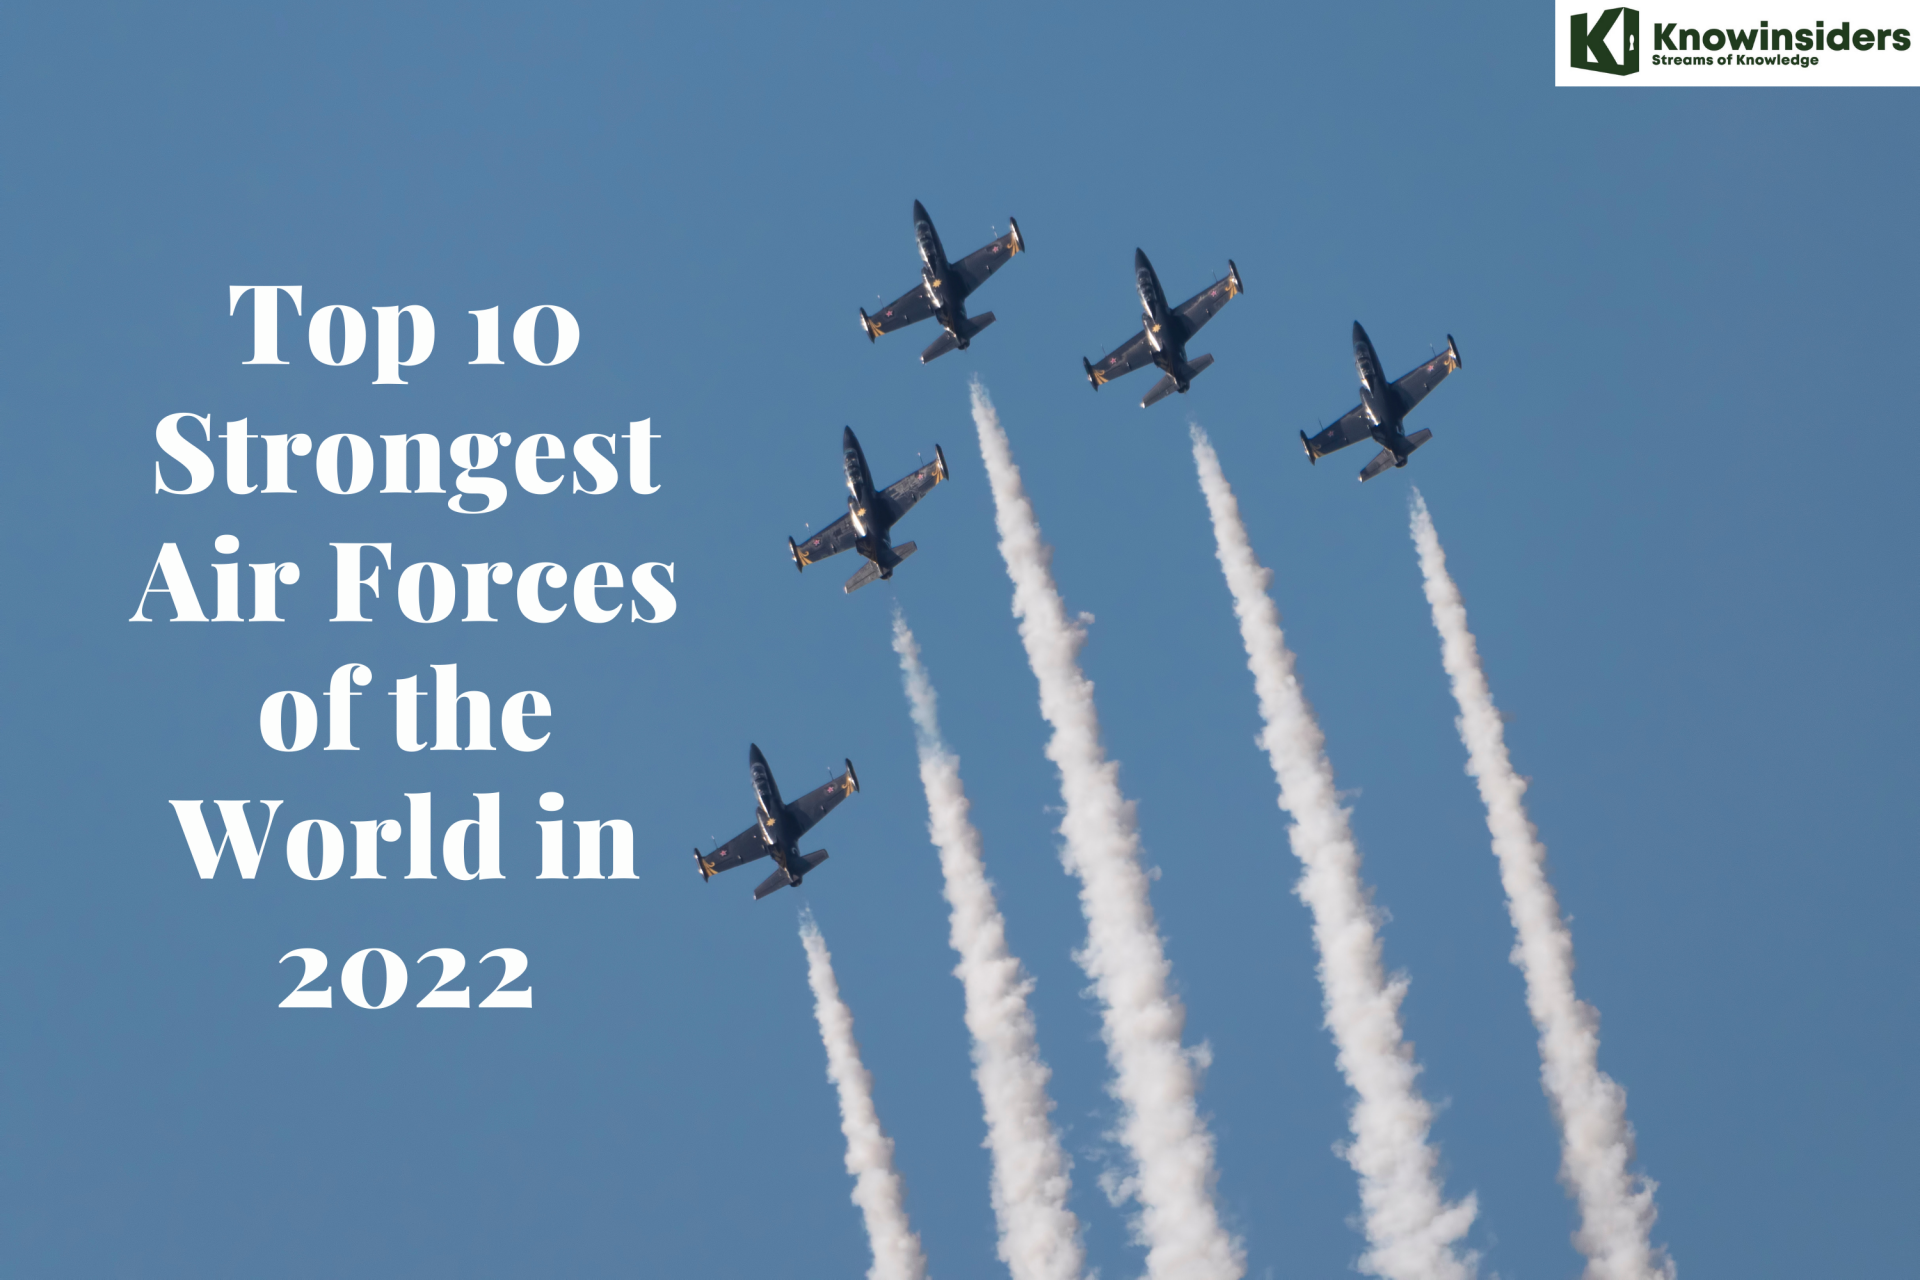 Top 10 Strongest Air Forces of the World in 2022/2023: India Overtakes China